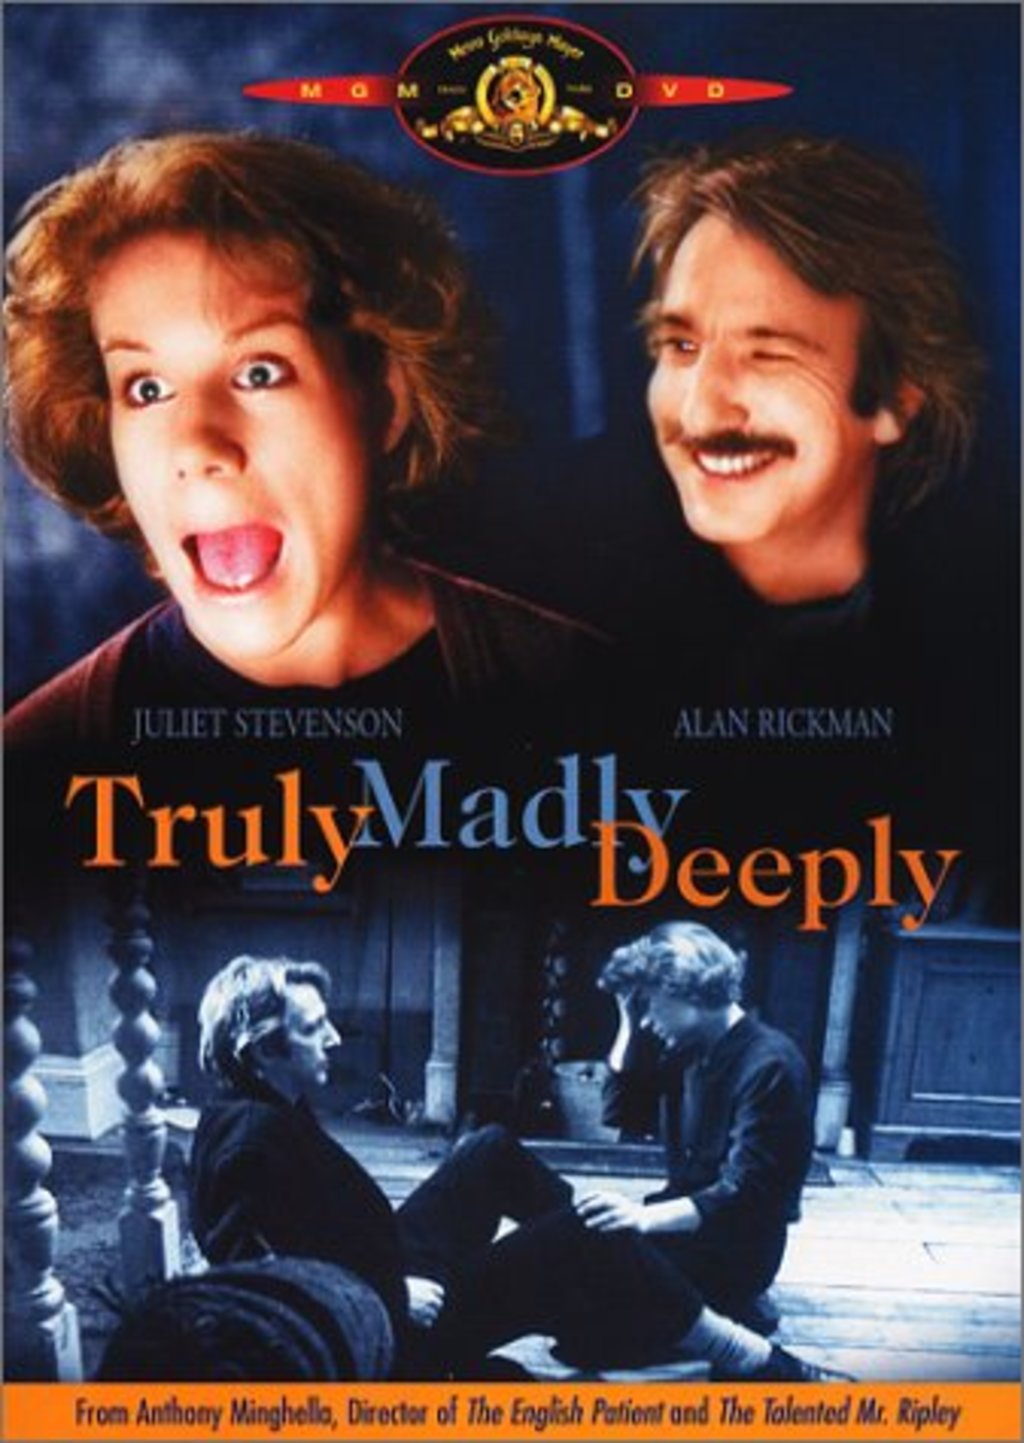 Watch Truly Madly Deeply on Netflix Today! | NetflixMovies.com